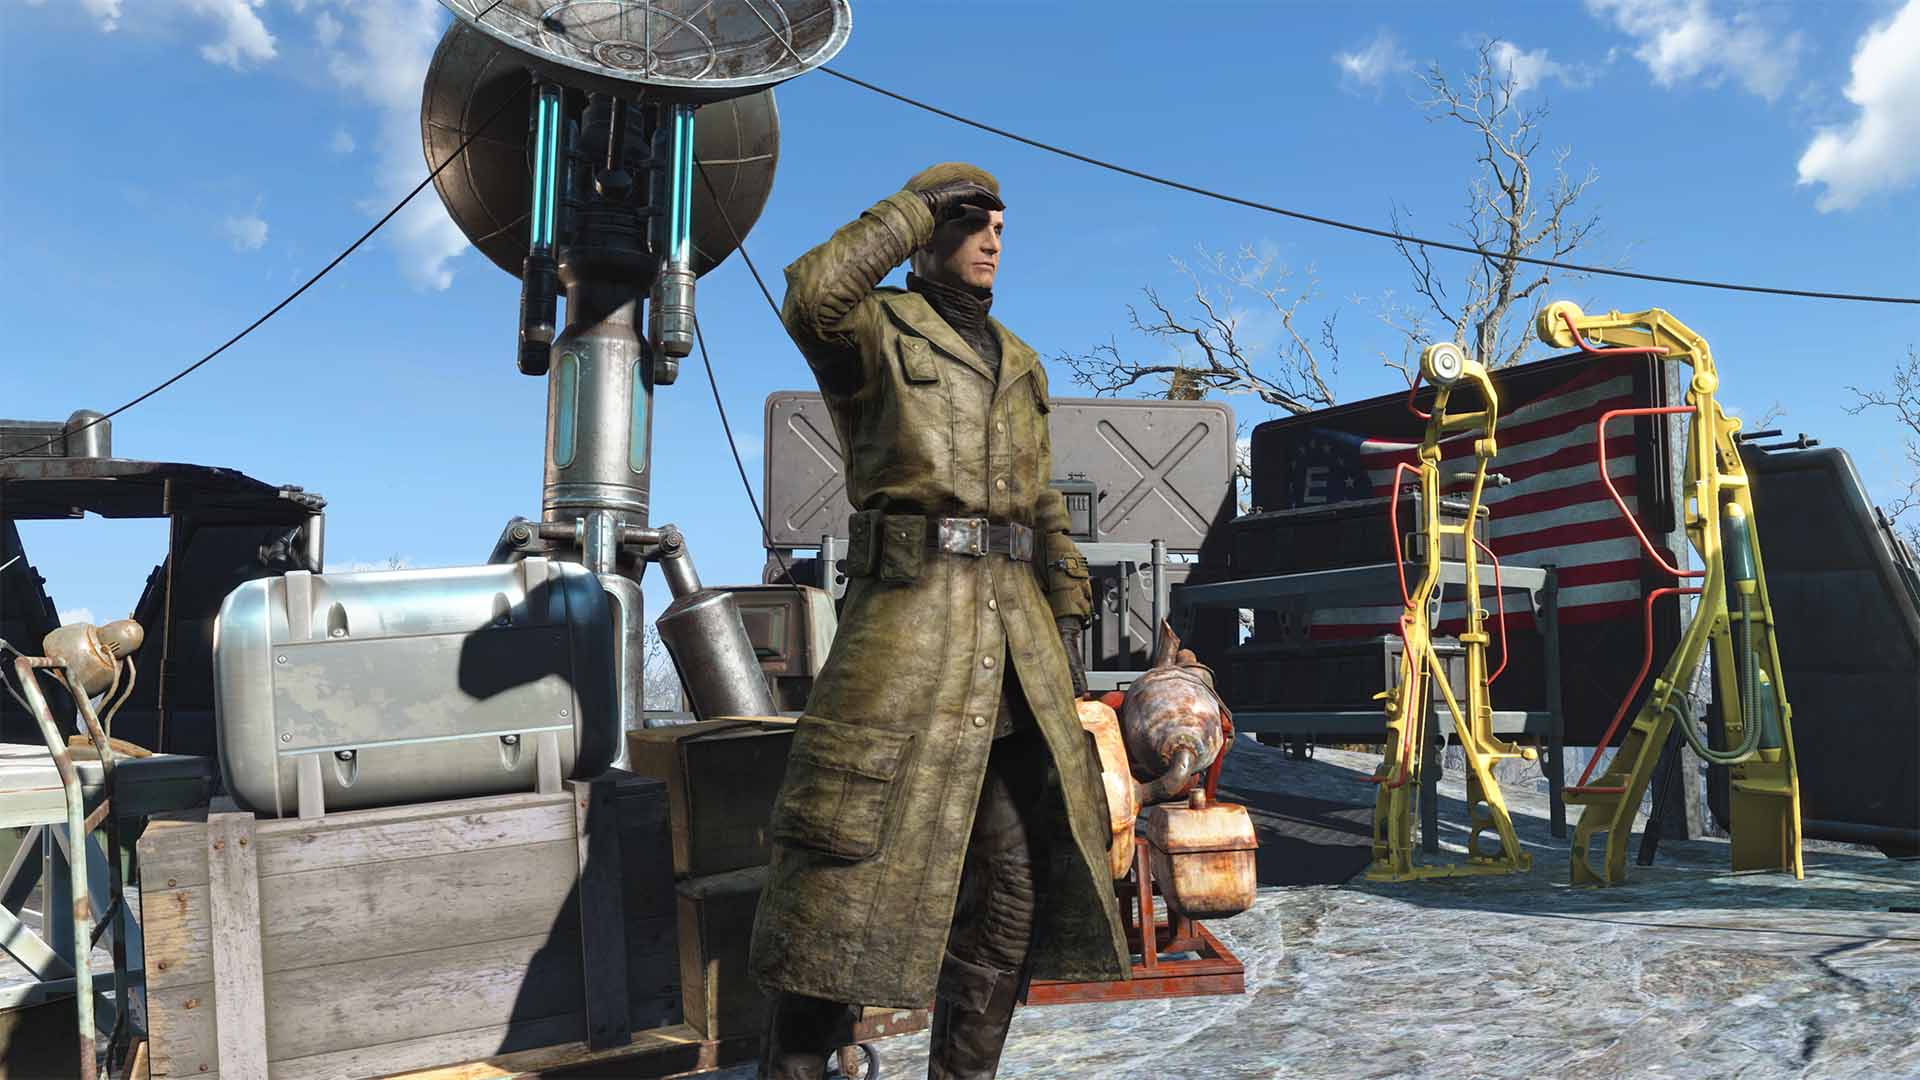 Fallout 4: How to Complete Enclave Quest Echoes of the Past